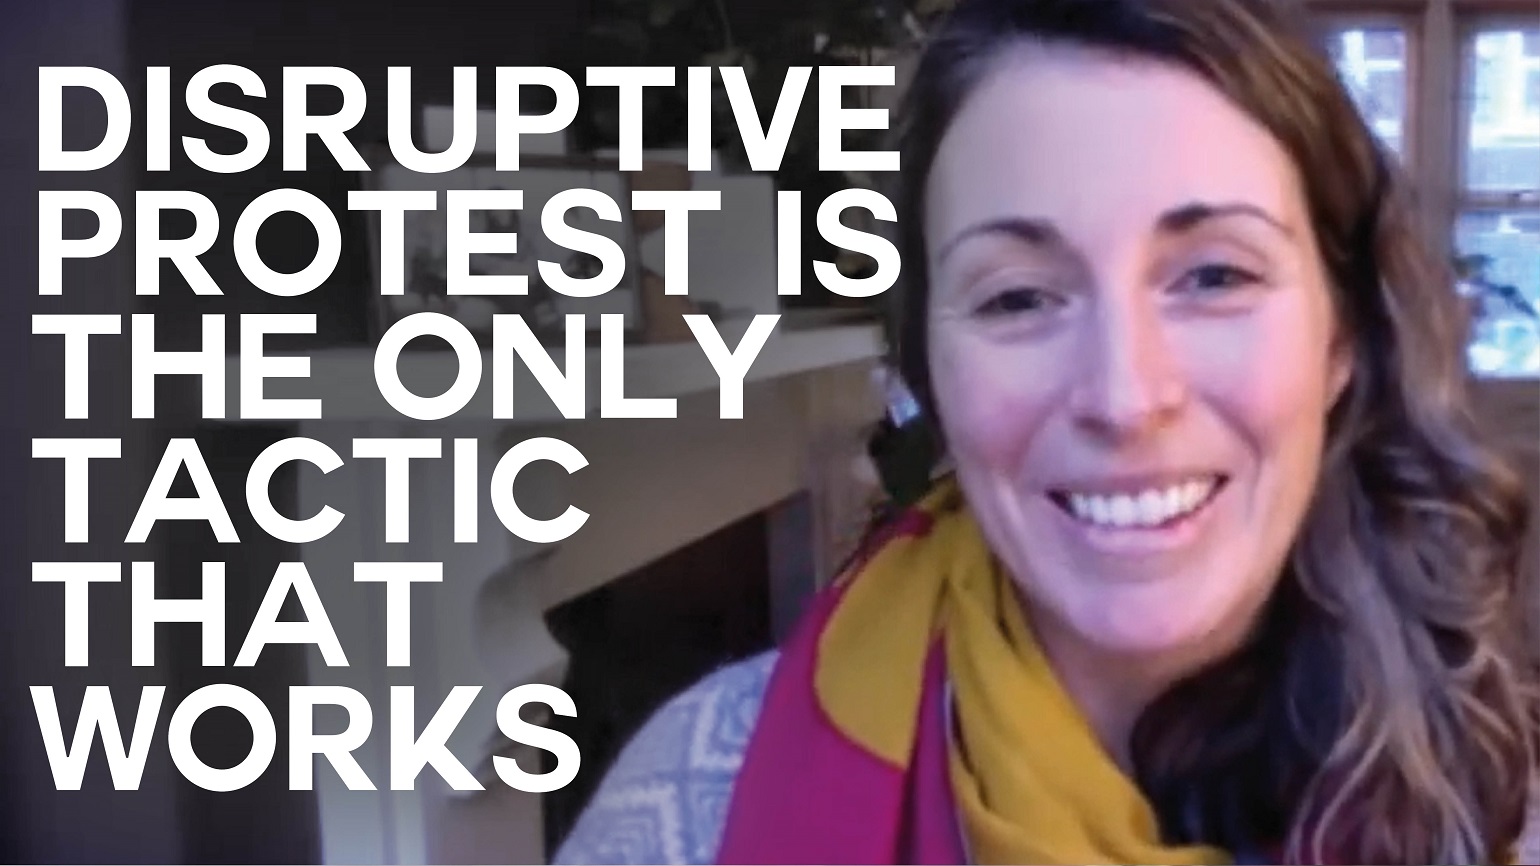 A still of an interview with Chloe Naldrett of Just Stop Oil with text overlaid reading "Disruptive protest is the only tactic that works"